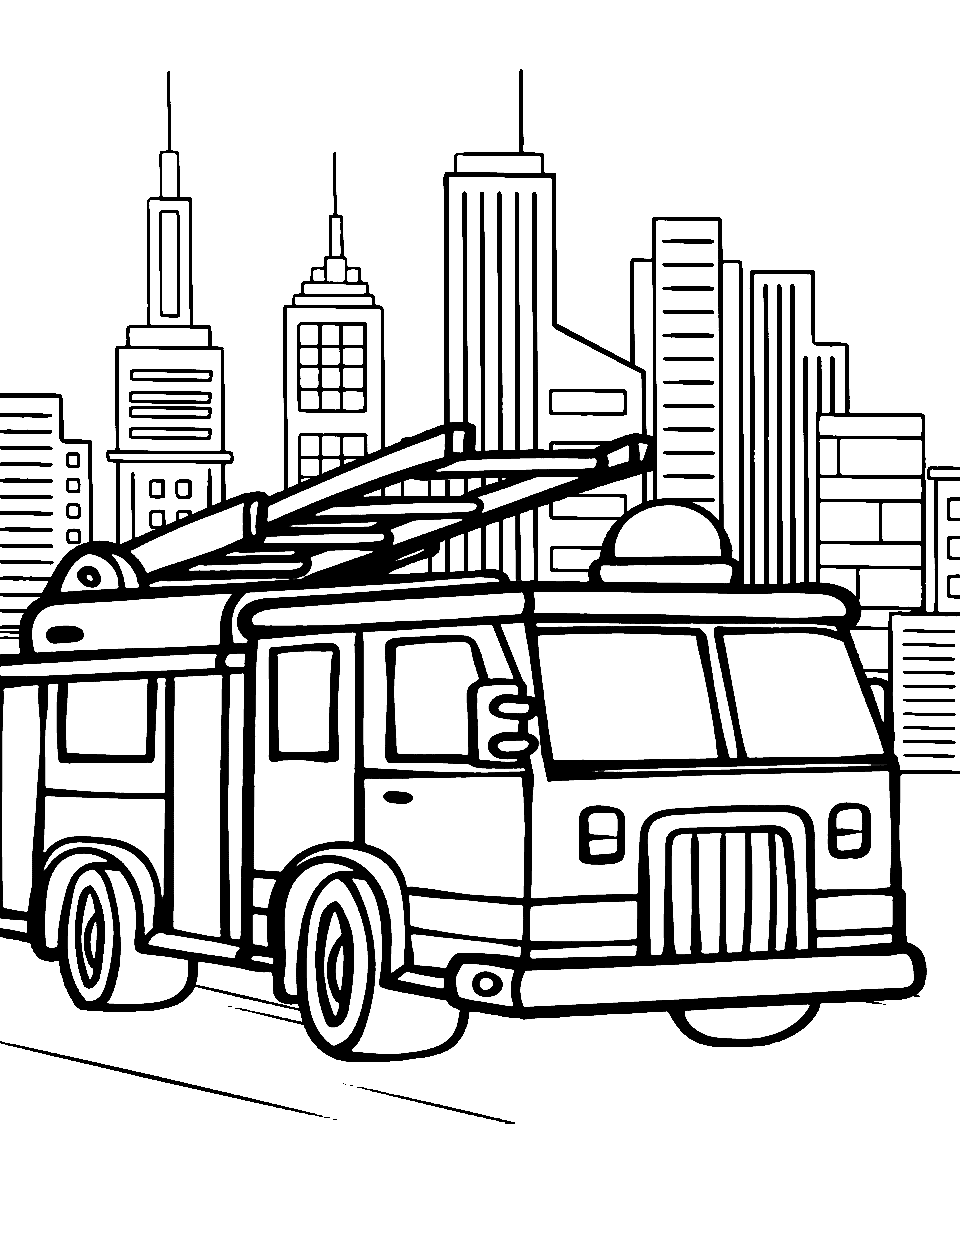 City Fire Truck Adventure Coloring Page - A fire truck navigating through busy city streets.